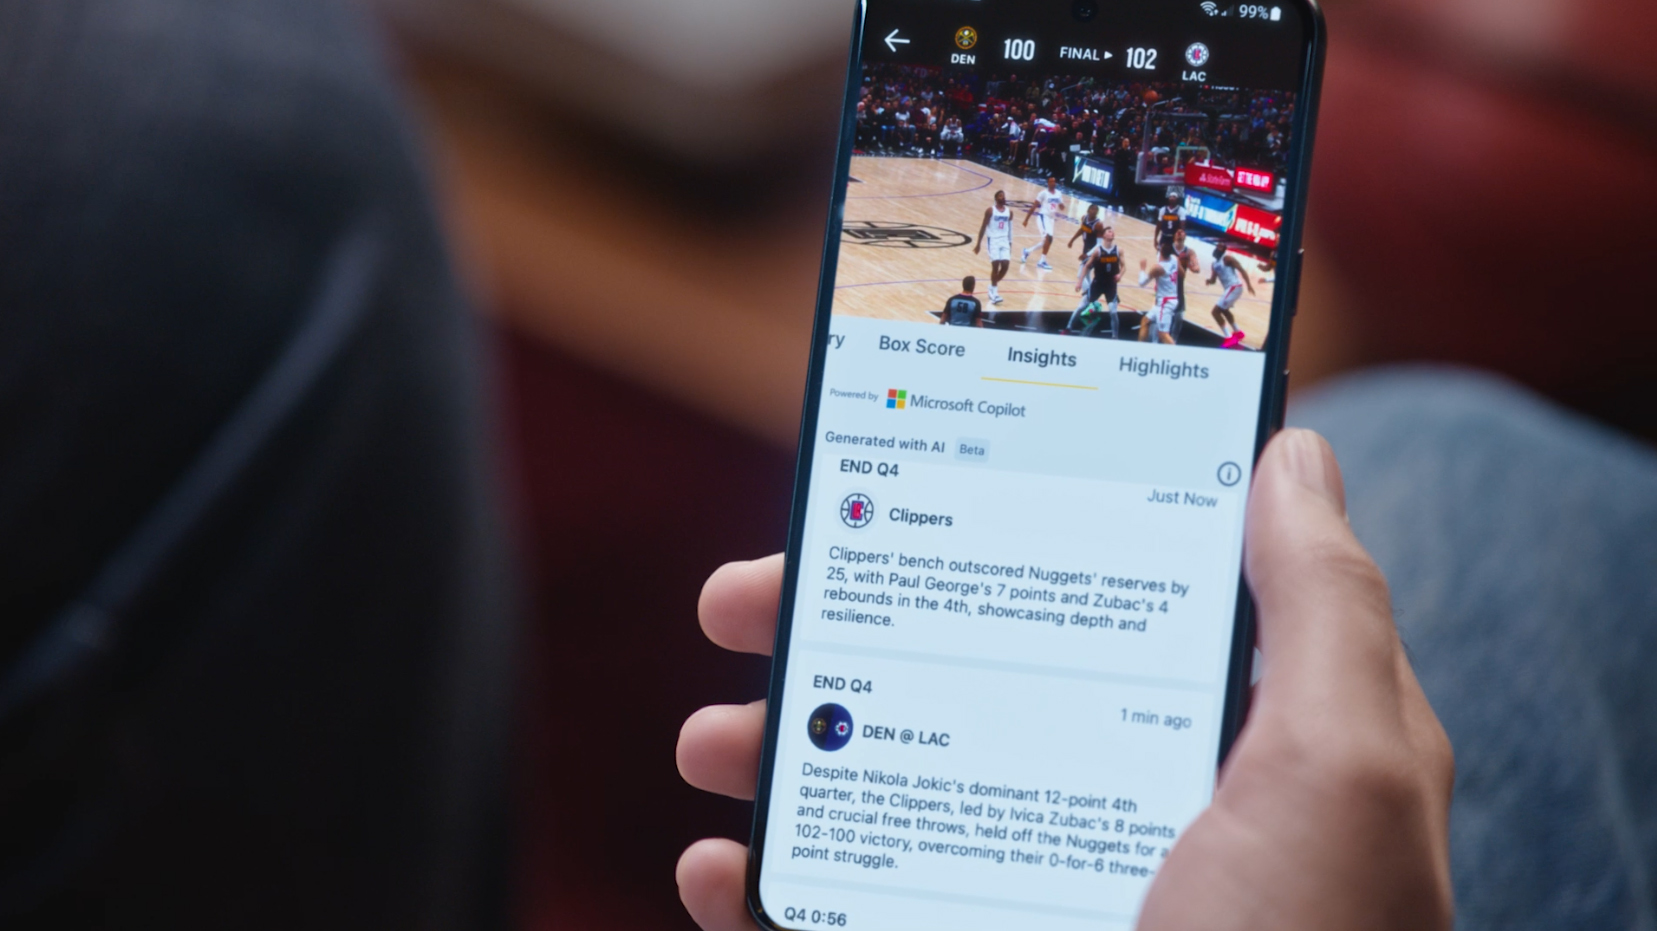 A person holding a smartphone displaying a basketball game score and related stats on a sports app.